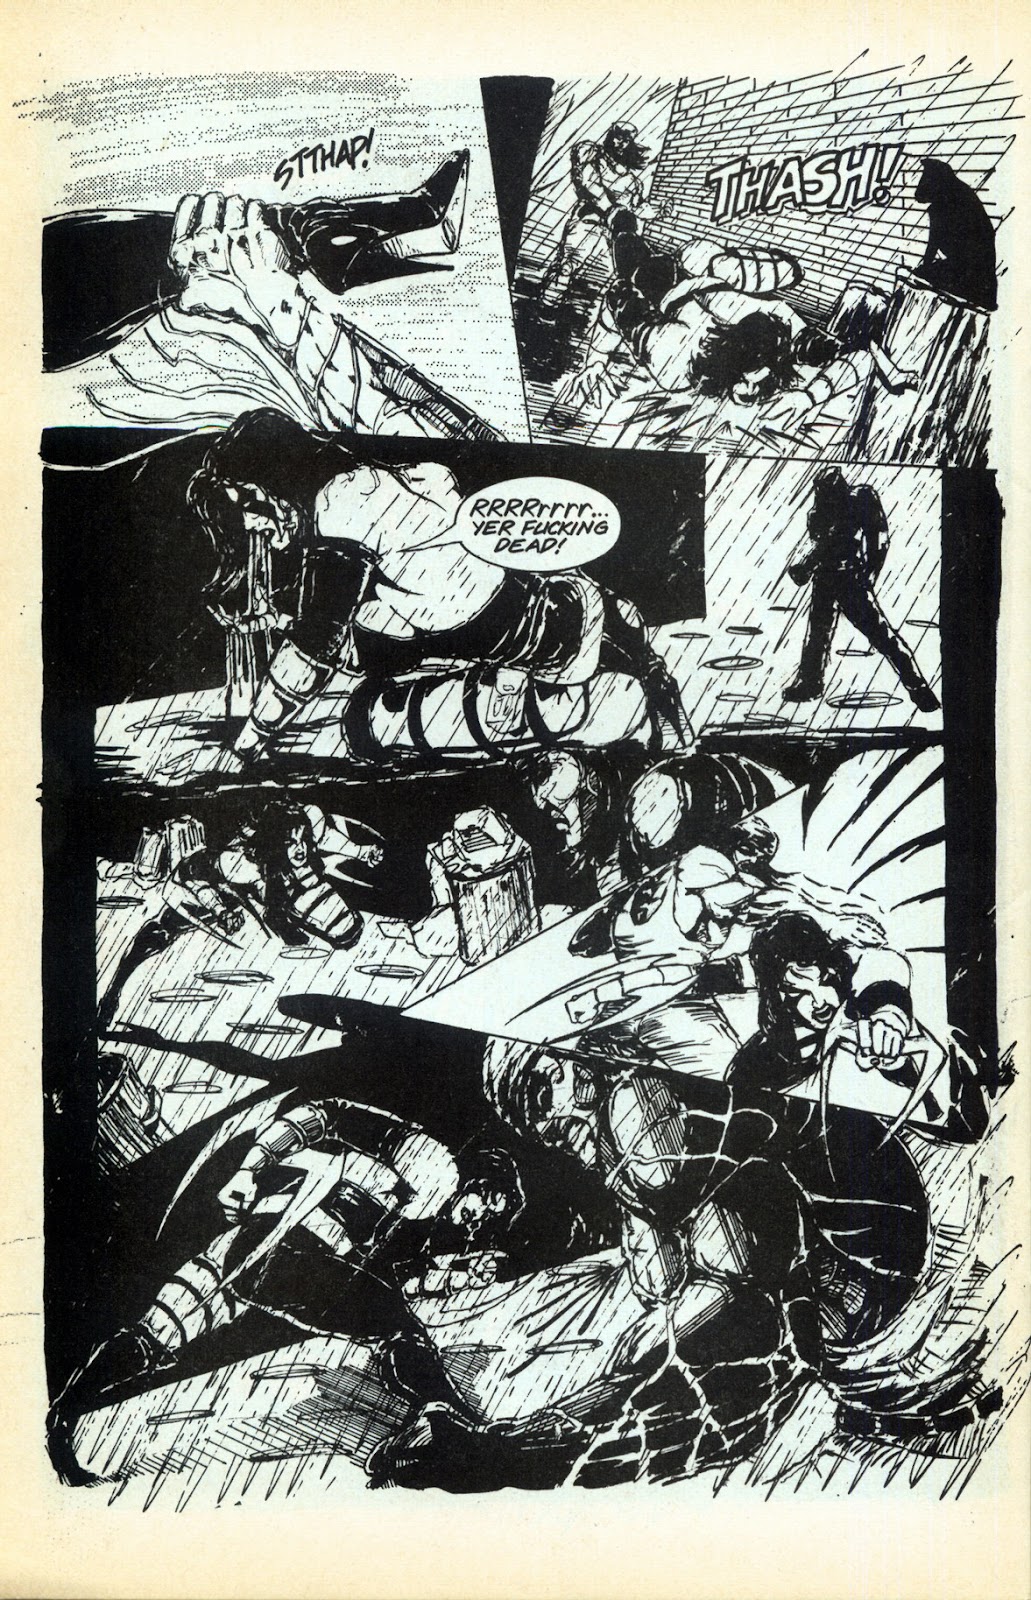 Razor/Dark Angel: The Final Nail issue 1 - Page 34